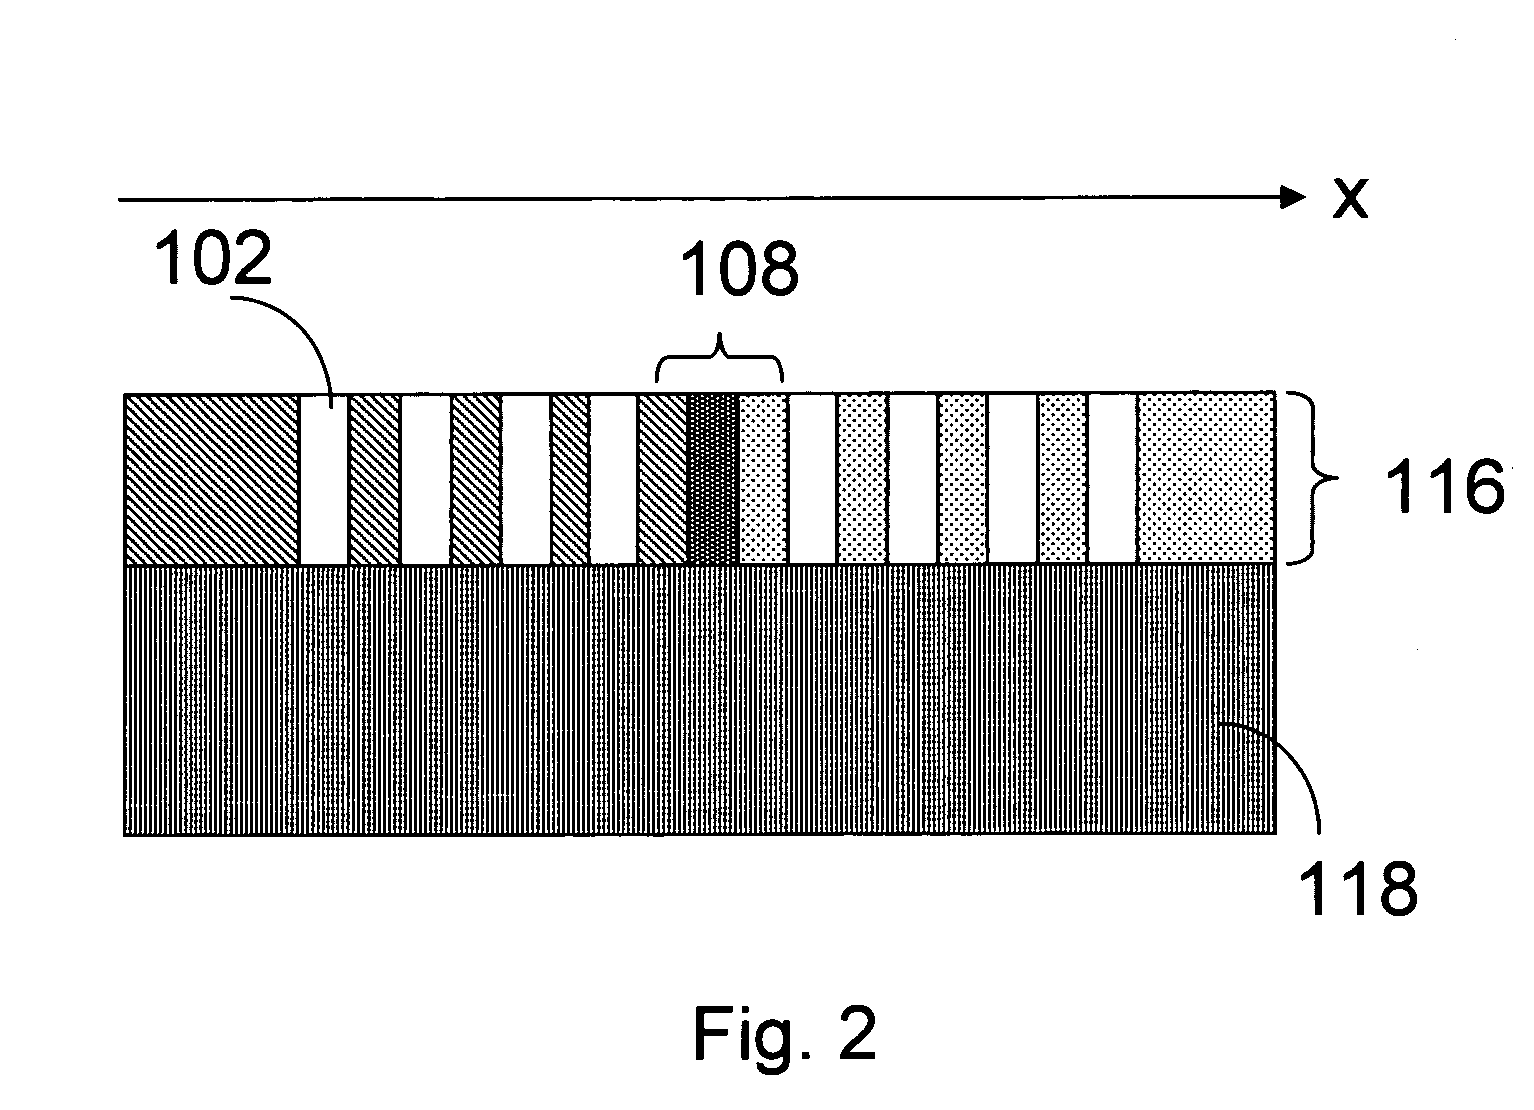 Apparatus and method for switching, modulation and dynamic control of light transmission using photonic crystals